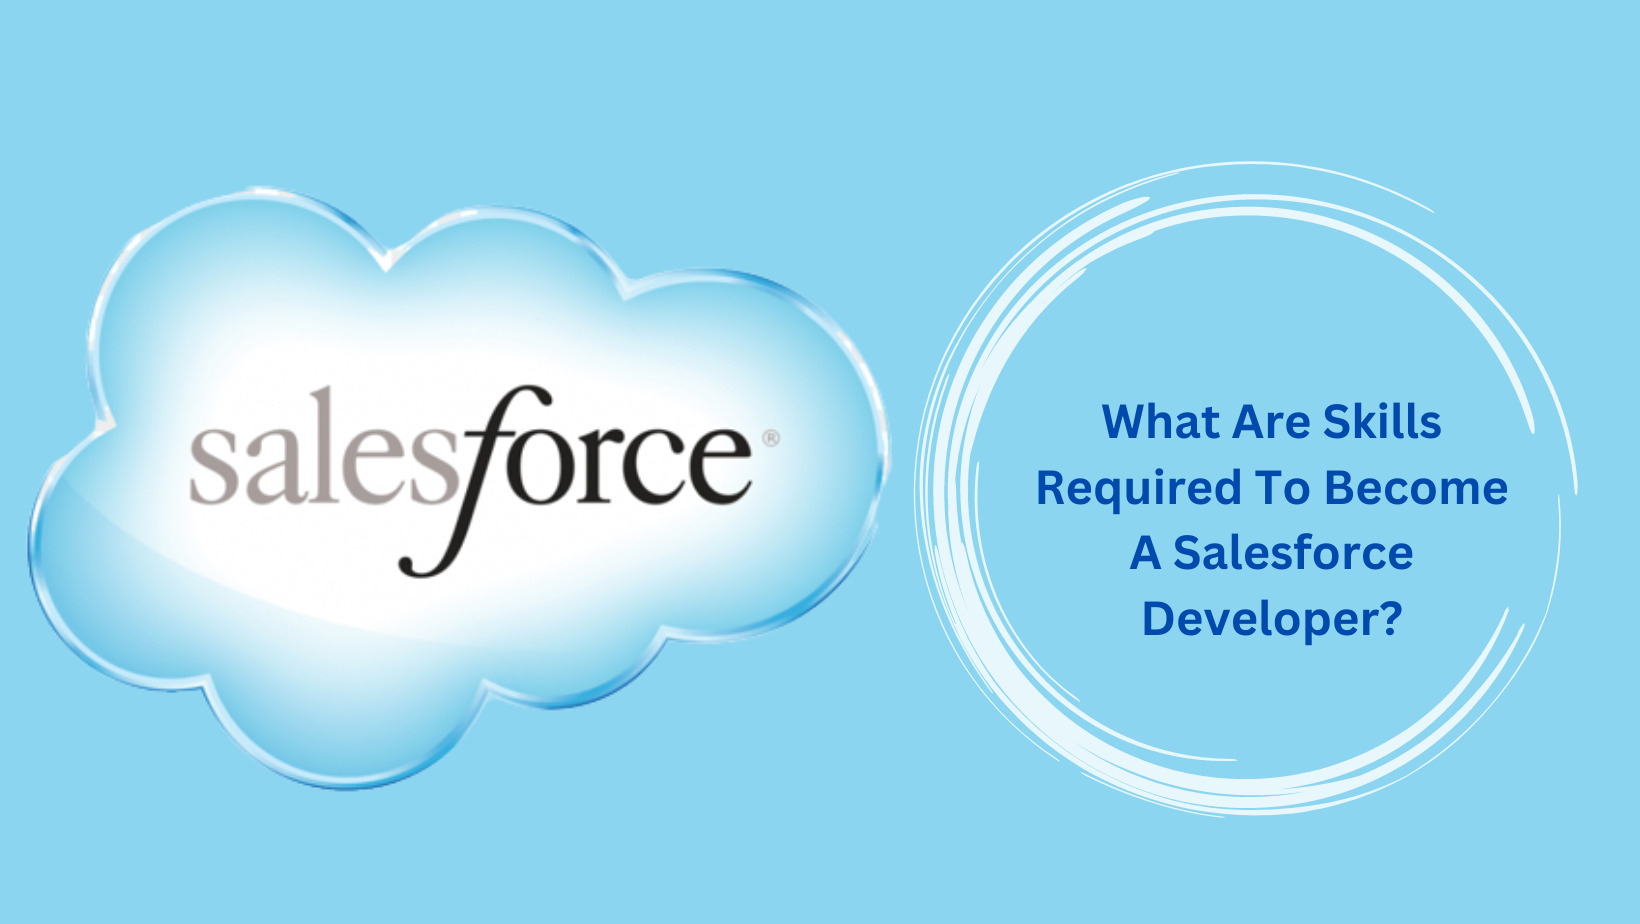 What Are Skills Required To Become A Salesforce Developer?